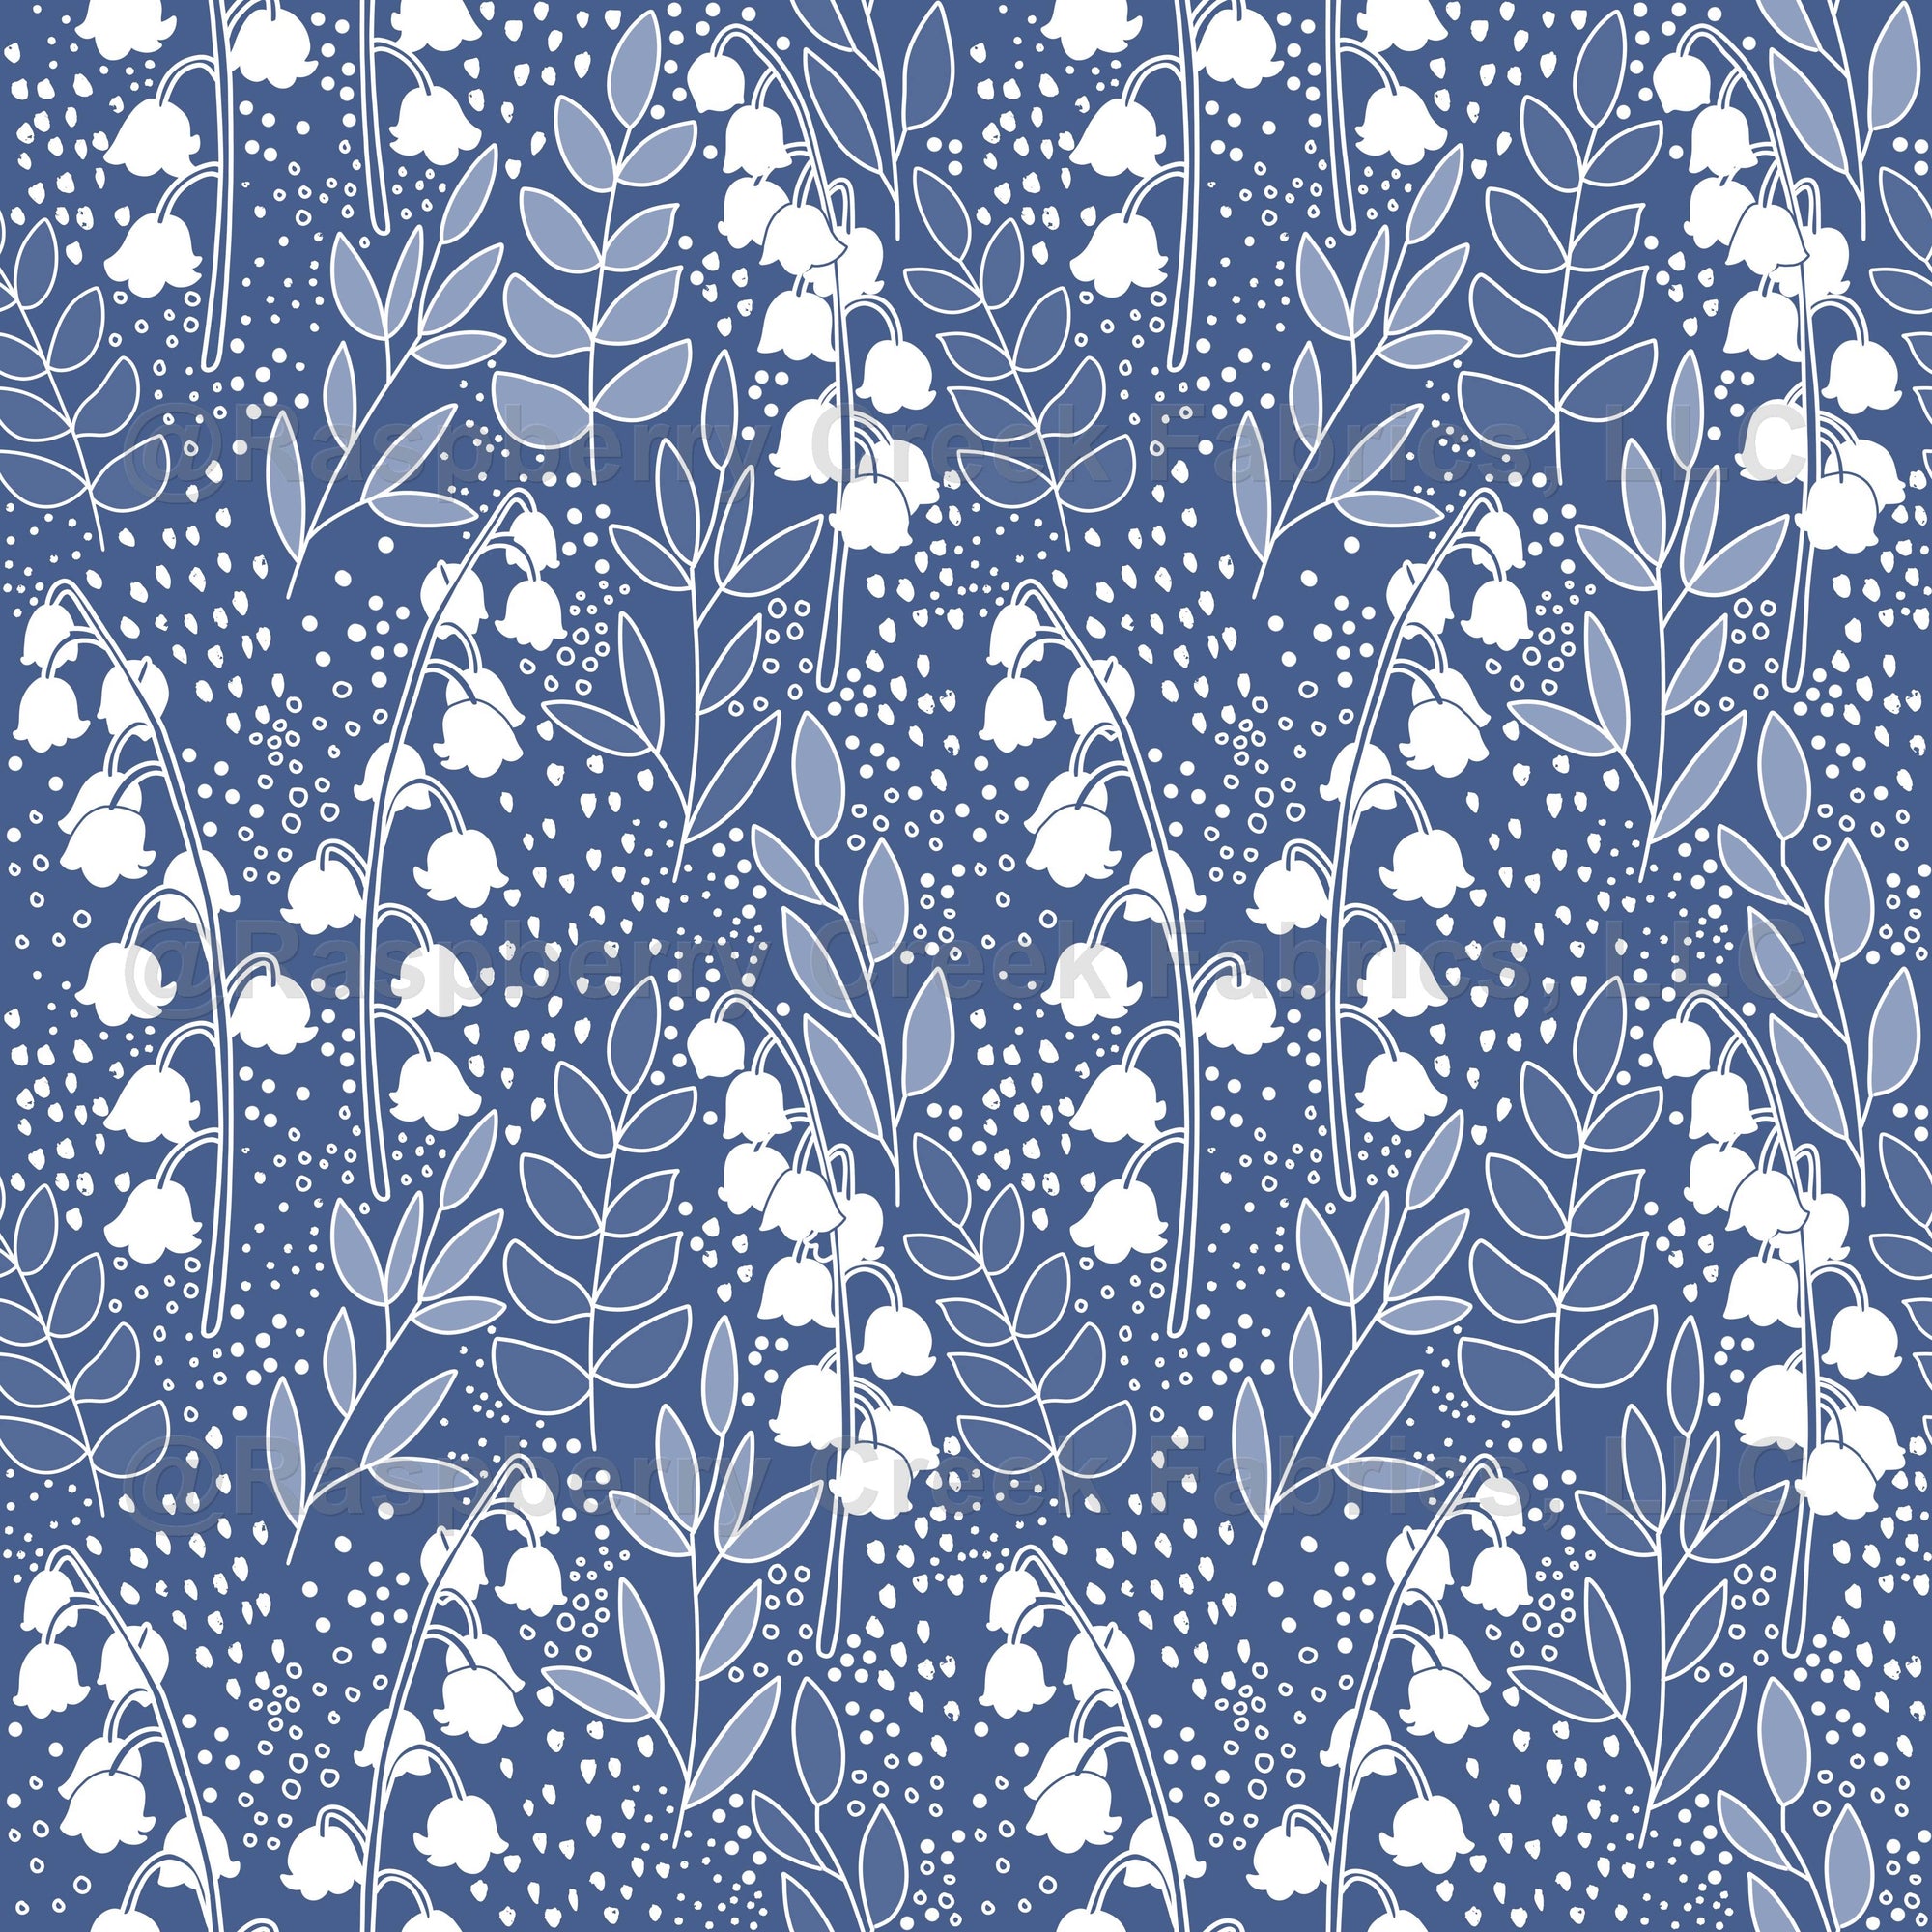 Fabric by The Yard - Cotton Velvet in French Blue | Serena & Lily